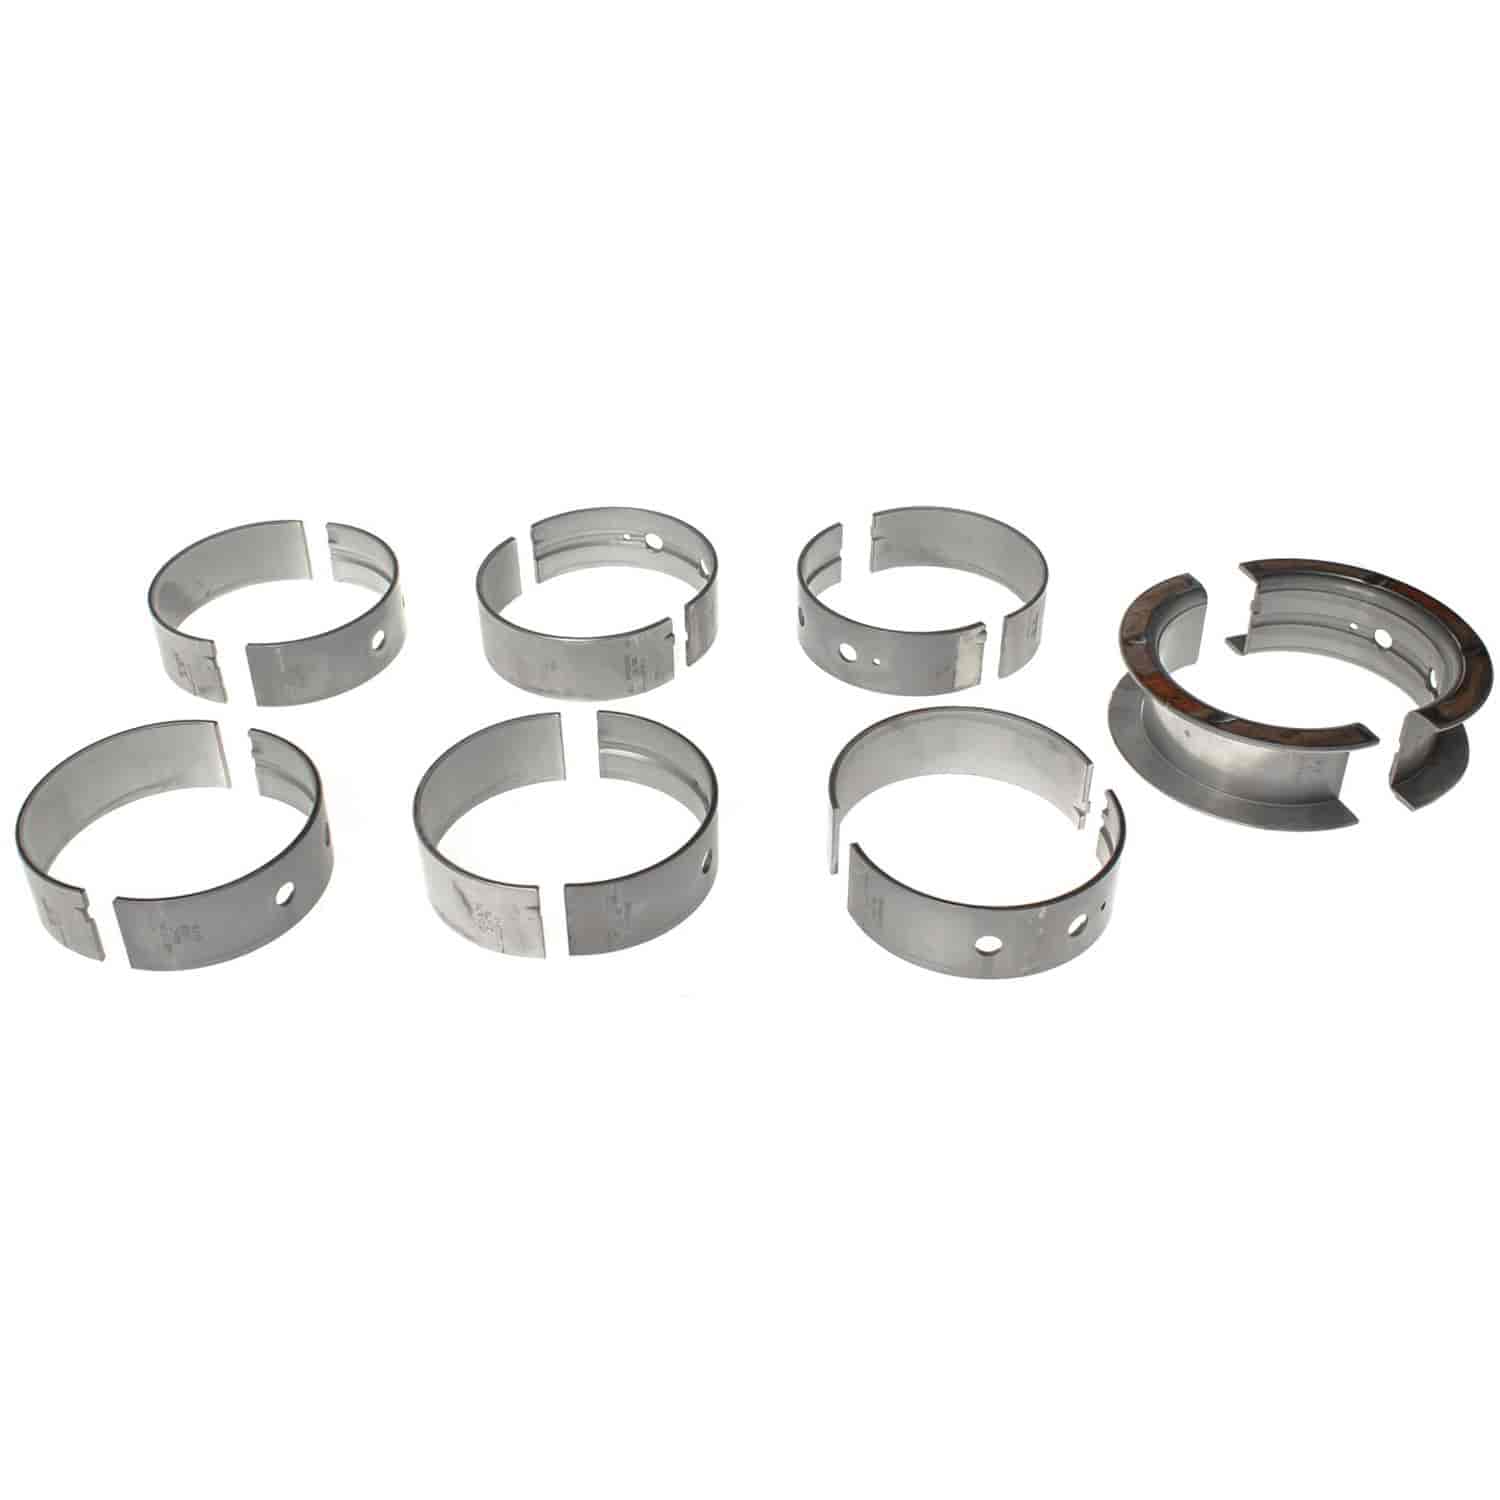 Main Bearings for Cummins 5.9L with -.25mm Undersize